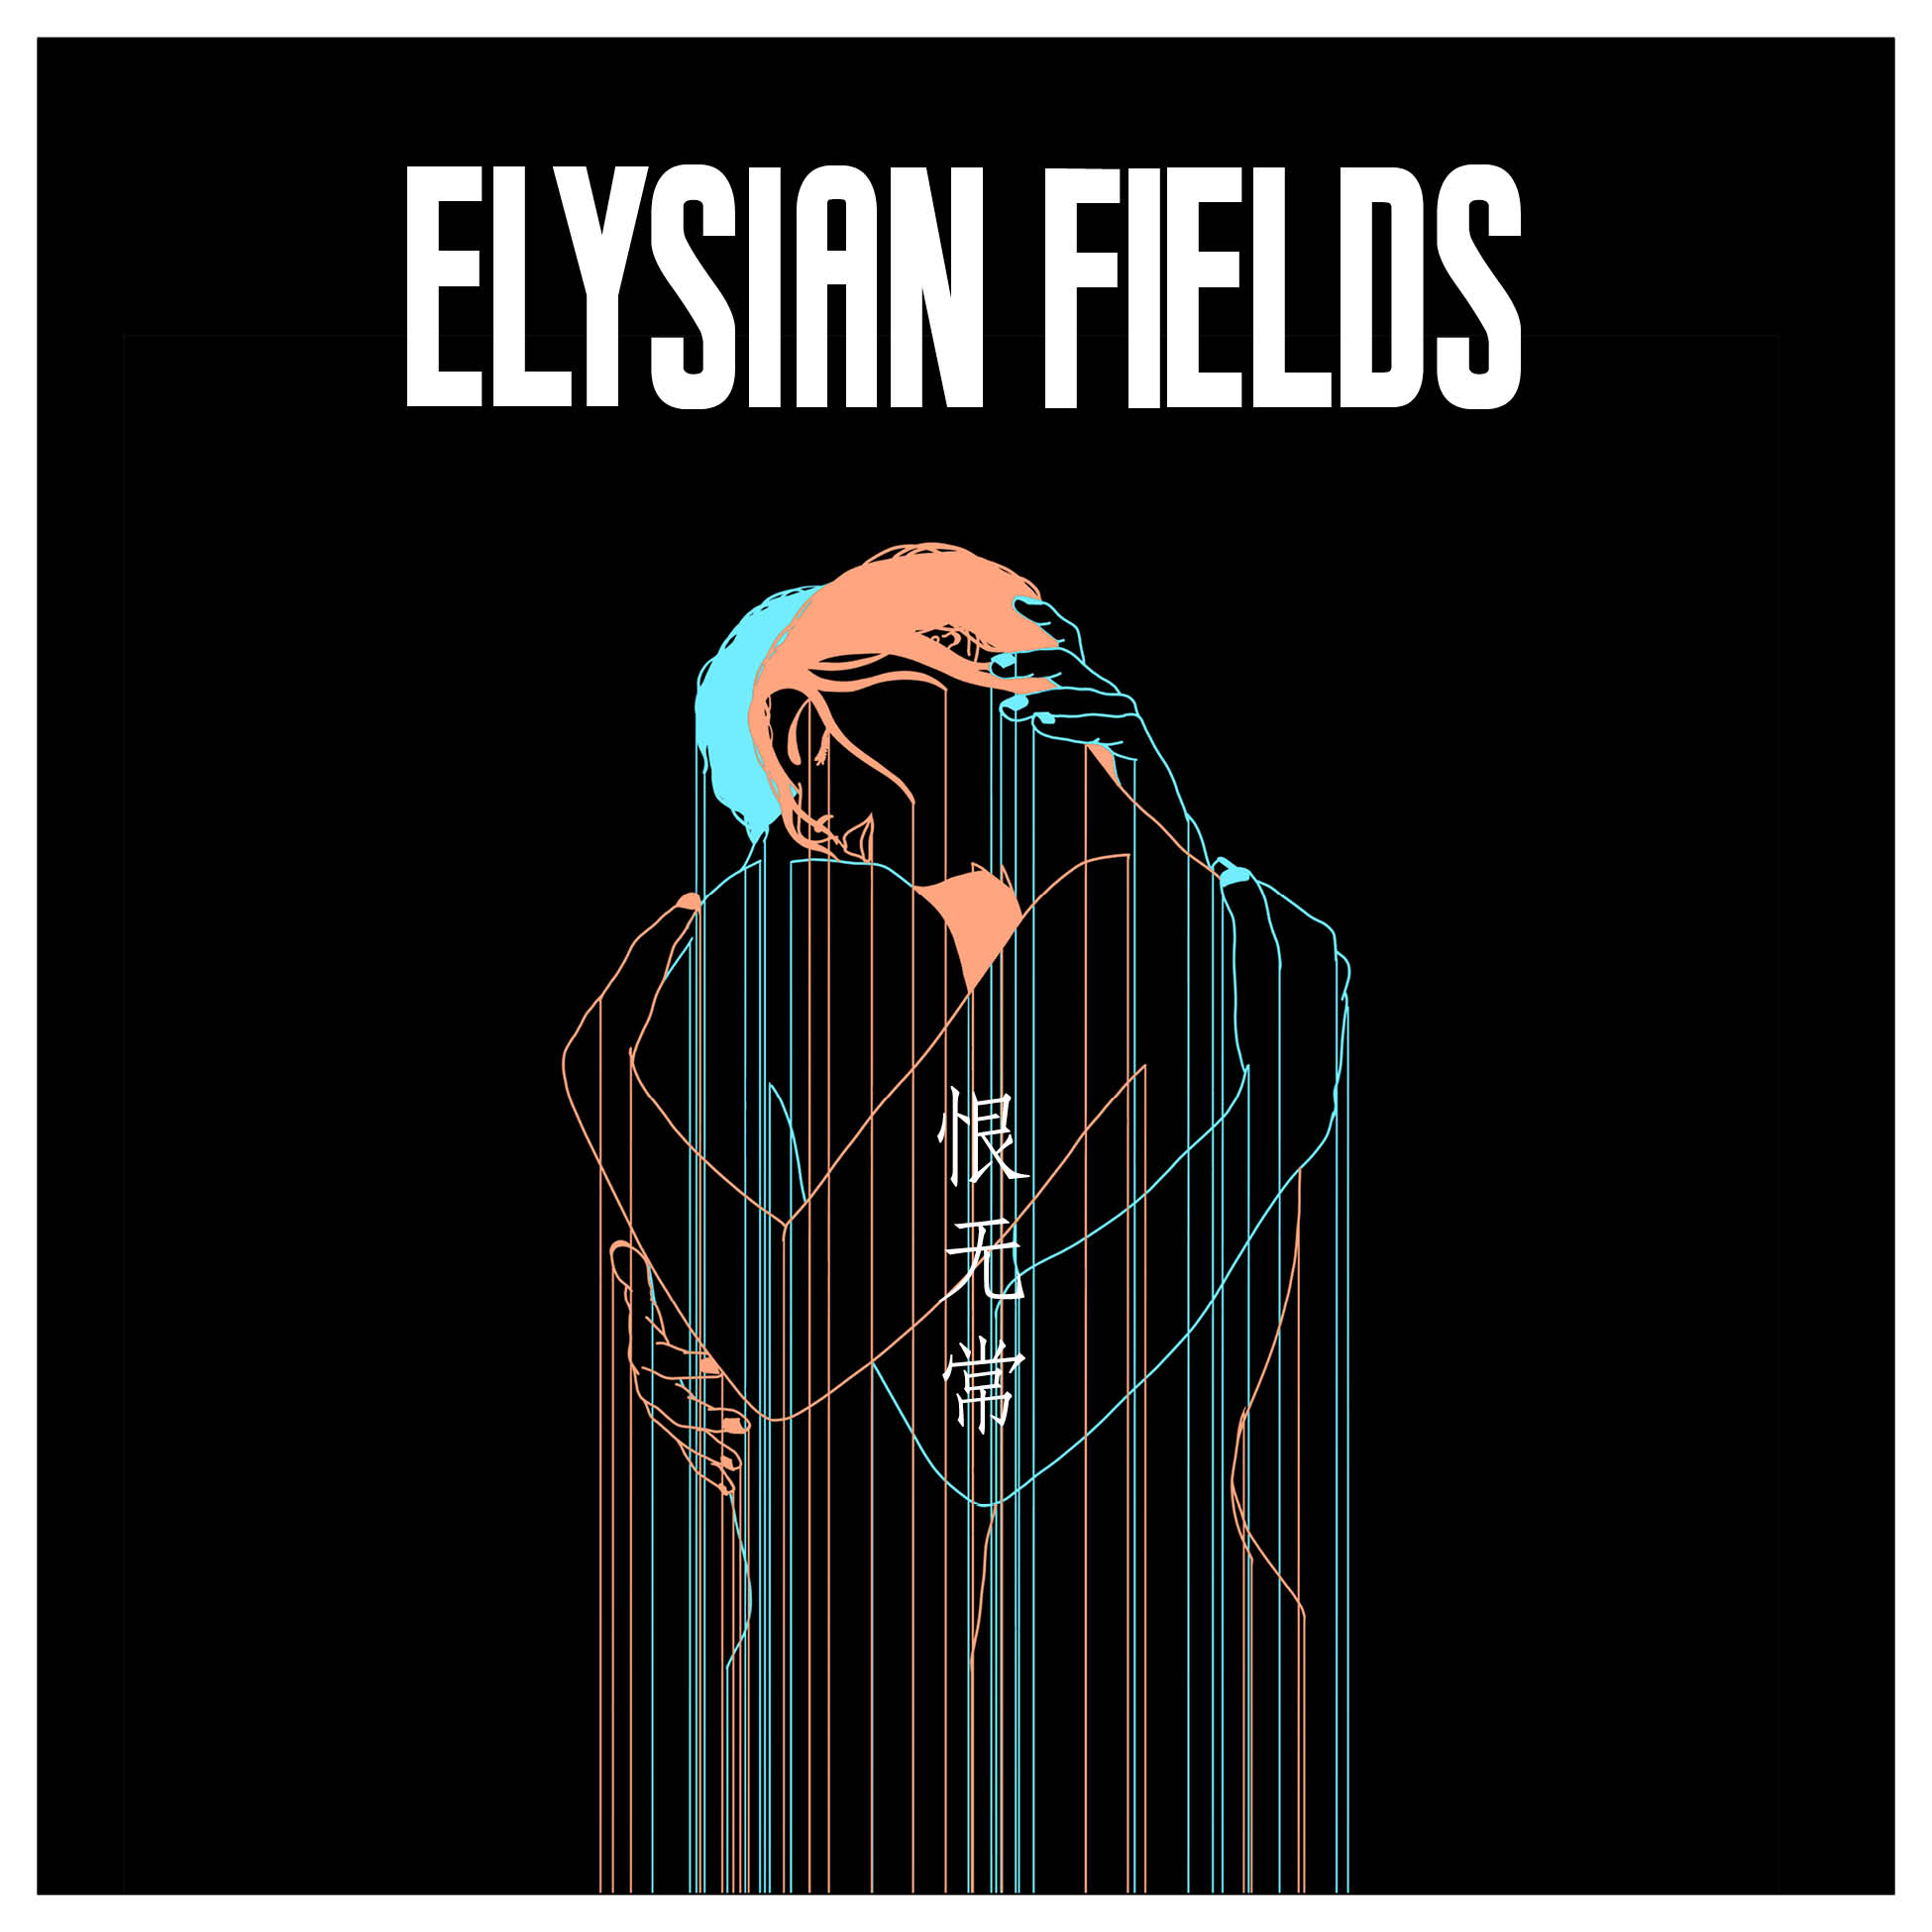 elysian fields transcience of life microcultures